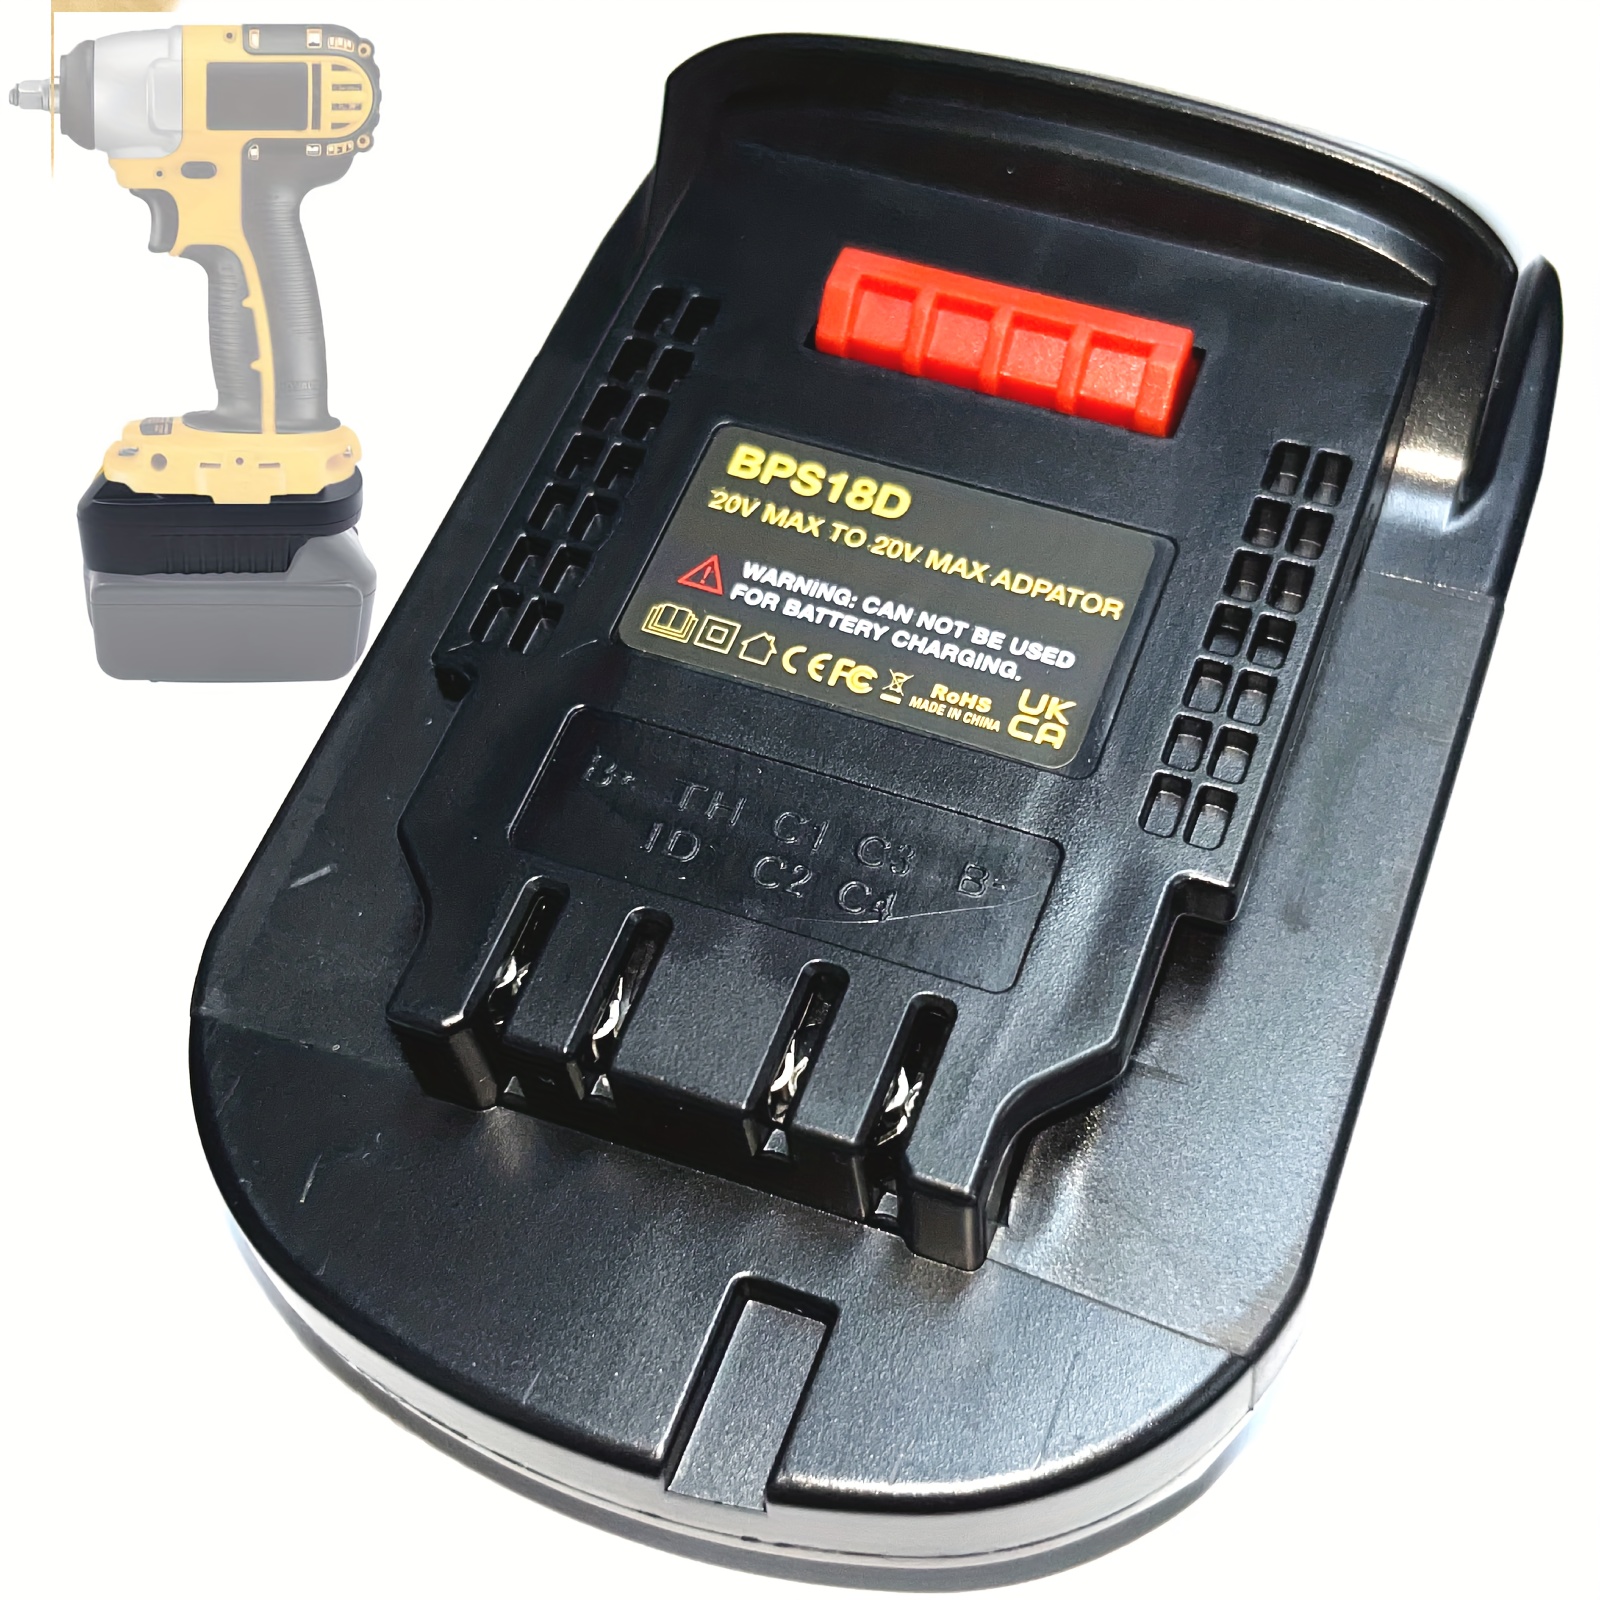  1x Adapter Only Fits Black & Decker Fits Porter Cable 20v MAX  (Not Old 18v) Tools Compatible with DeWalt 20v MAX Li-Ion Battery - Adapter  Only : Tools & Home Improvement